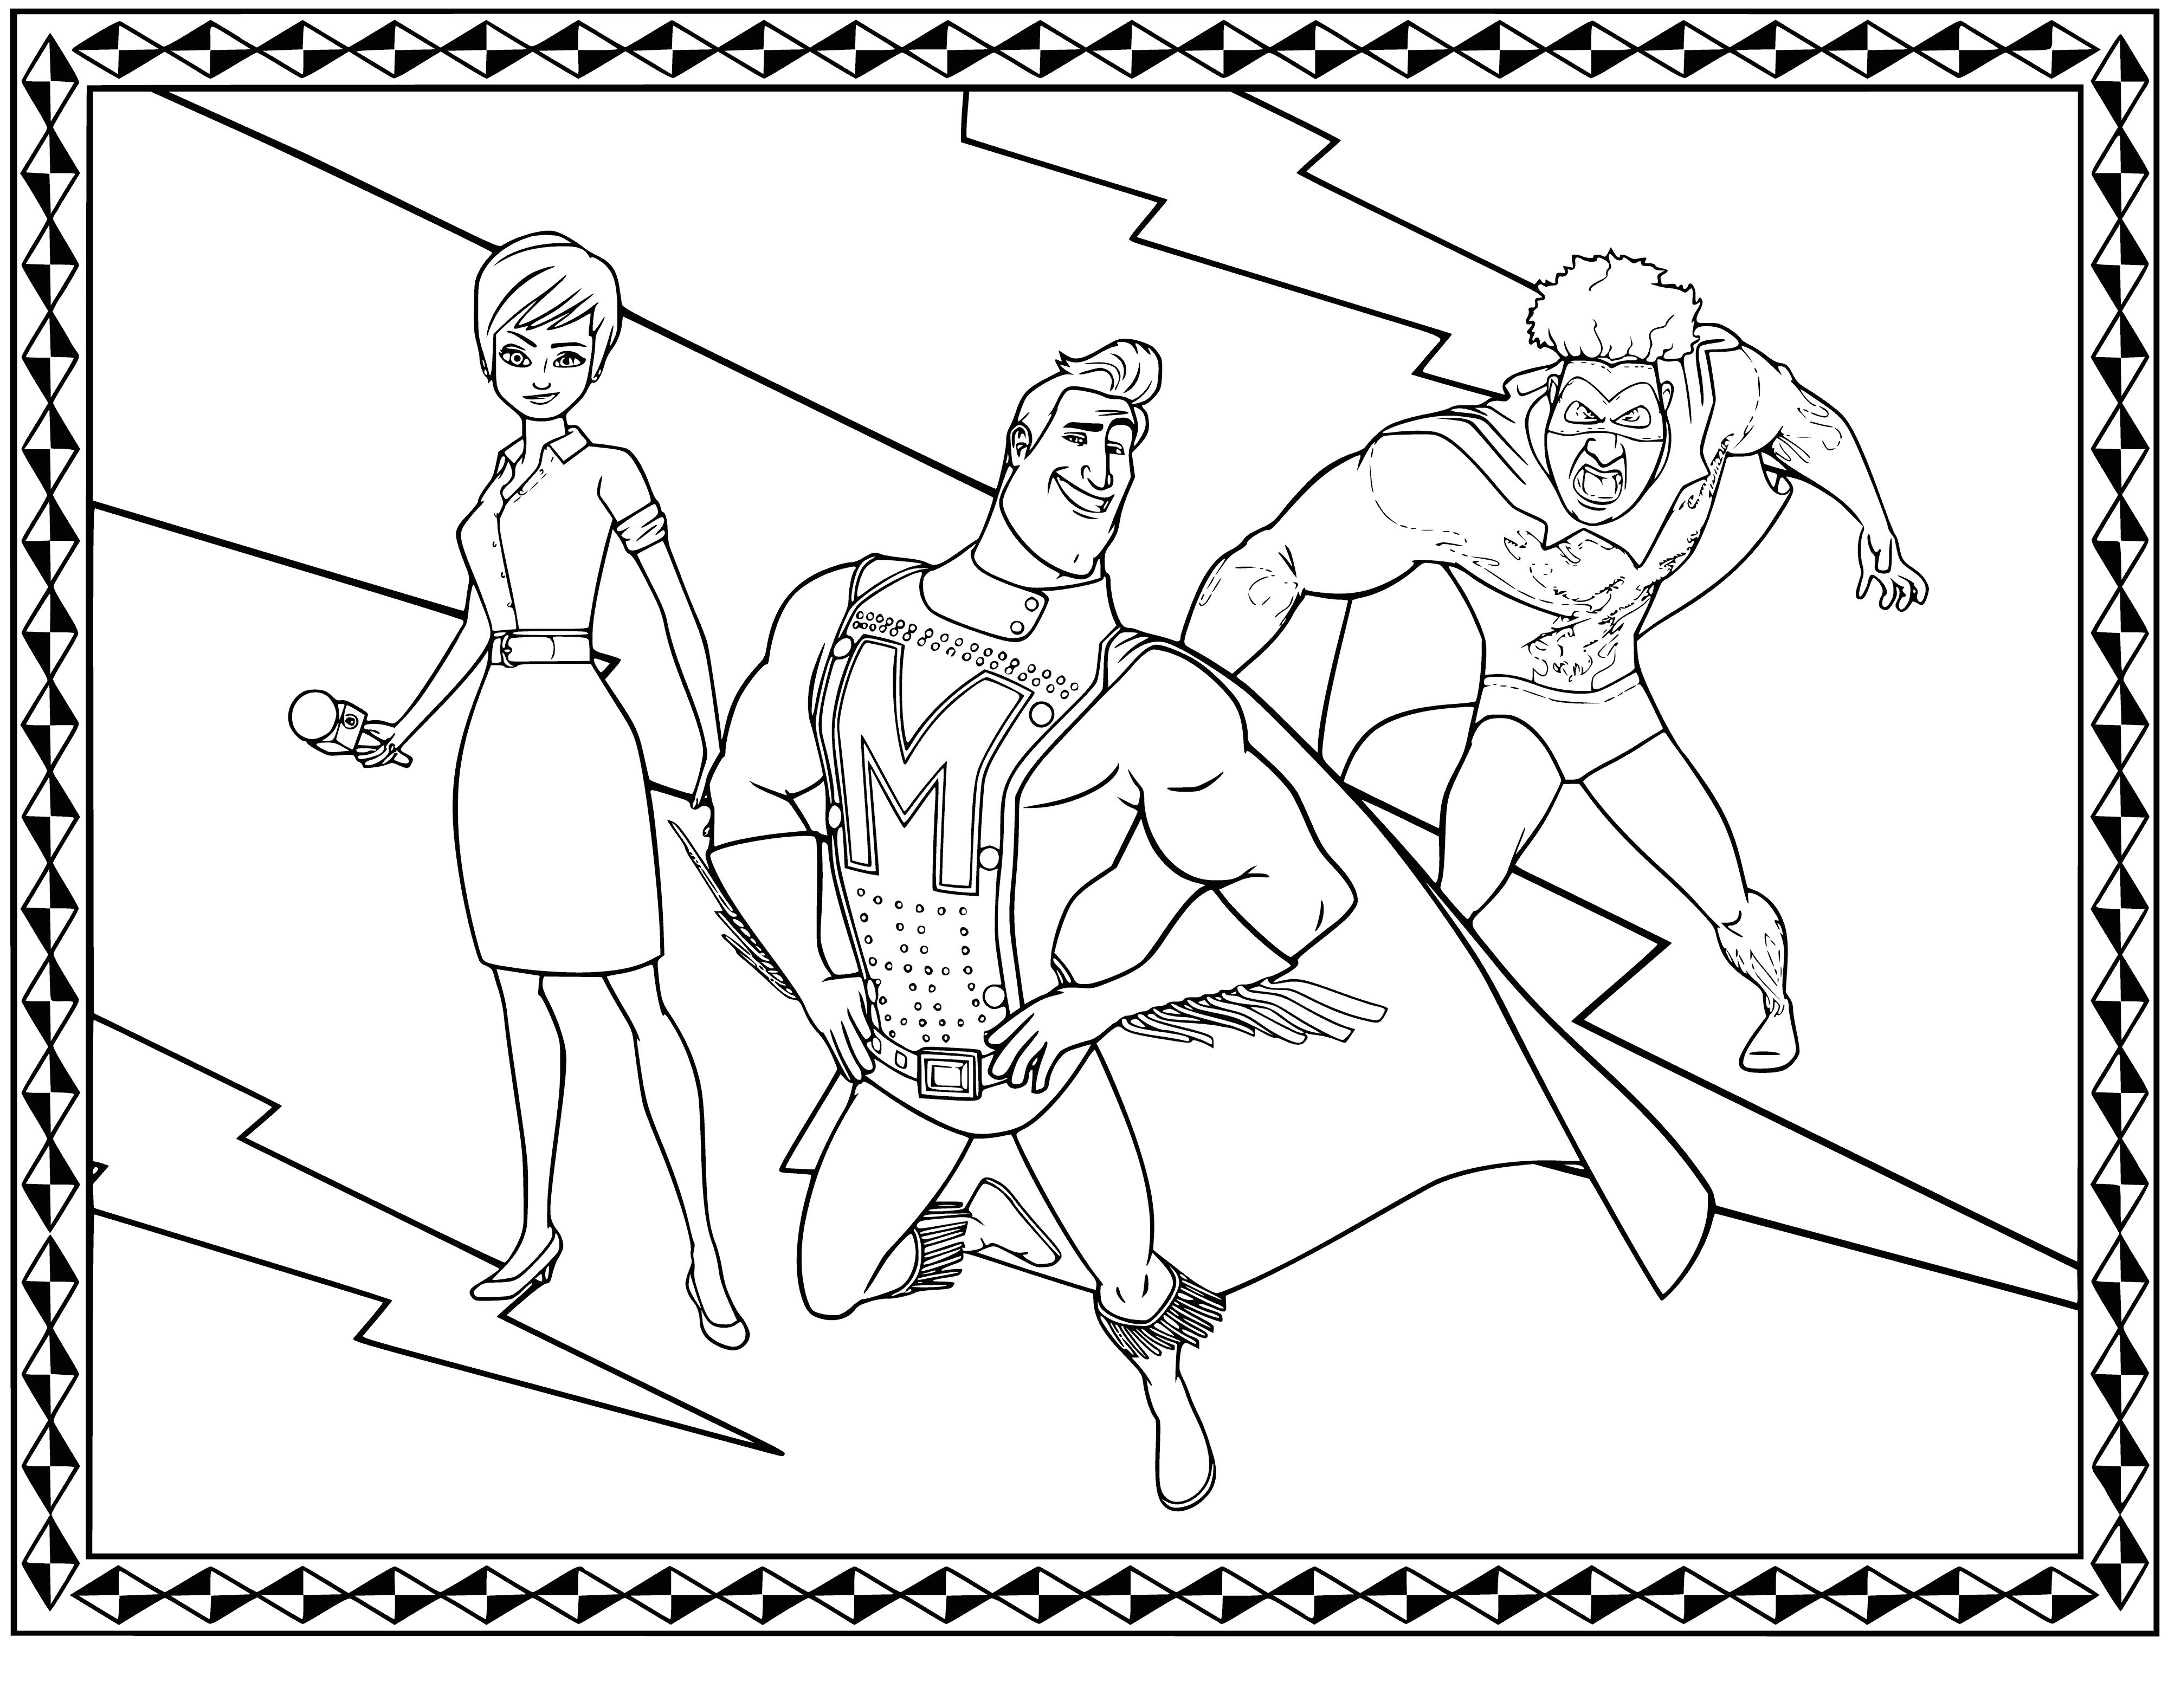 coloring page: Megamind, Roxana, Metromen and Titan are featured in a coloring page; Megamind is a blue alien, Roxana is a human, Metromen are small blue aliens, and Titan is a large green alien.